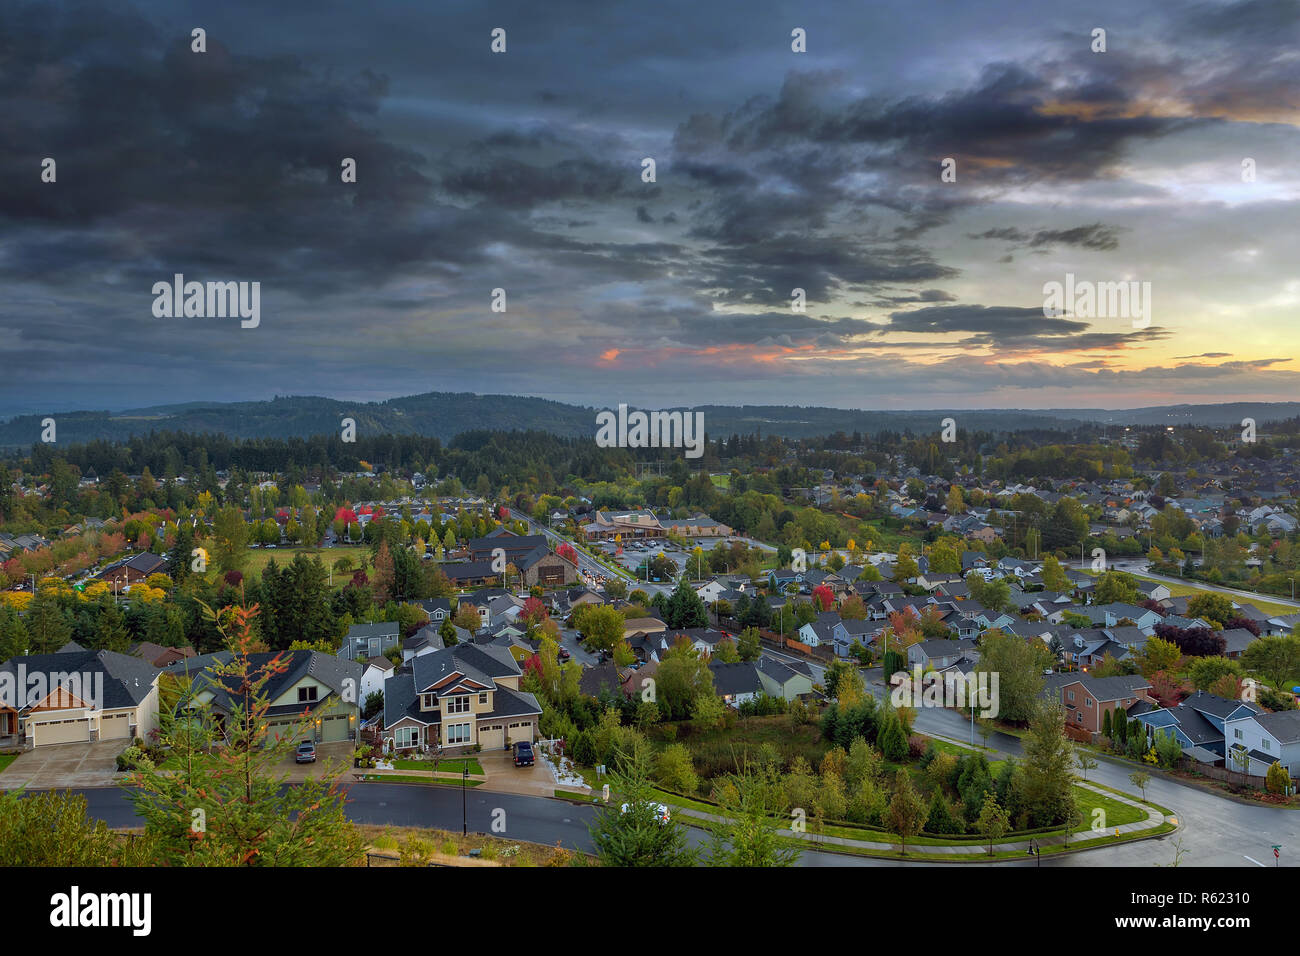 Happy Valley Residential Neighborhood during Sunset Stock Photo